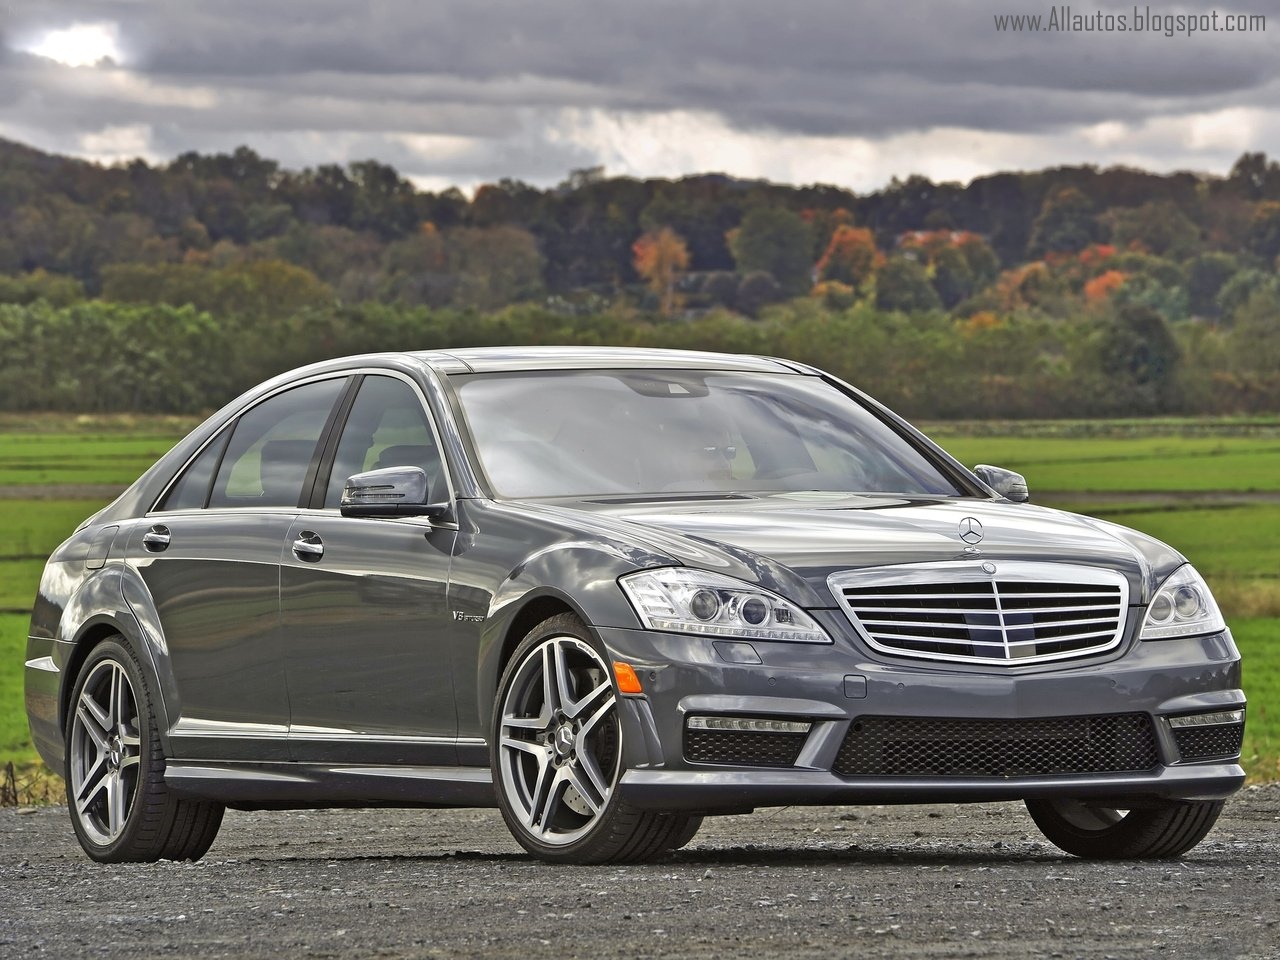 Autos: W221 Mercedes Benz S63 and S65 AMG. (2011 + 2012 models)